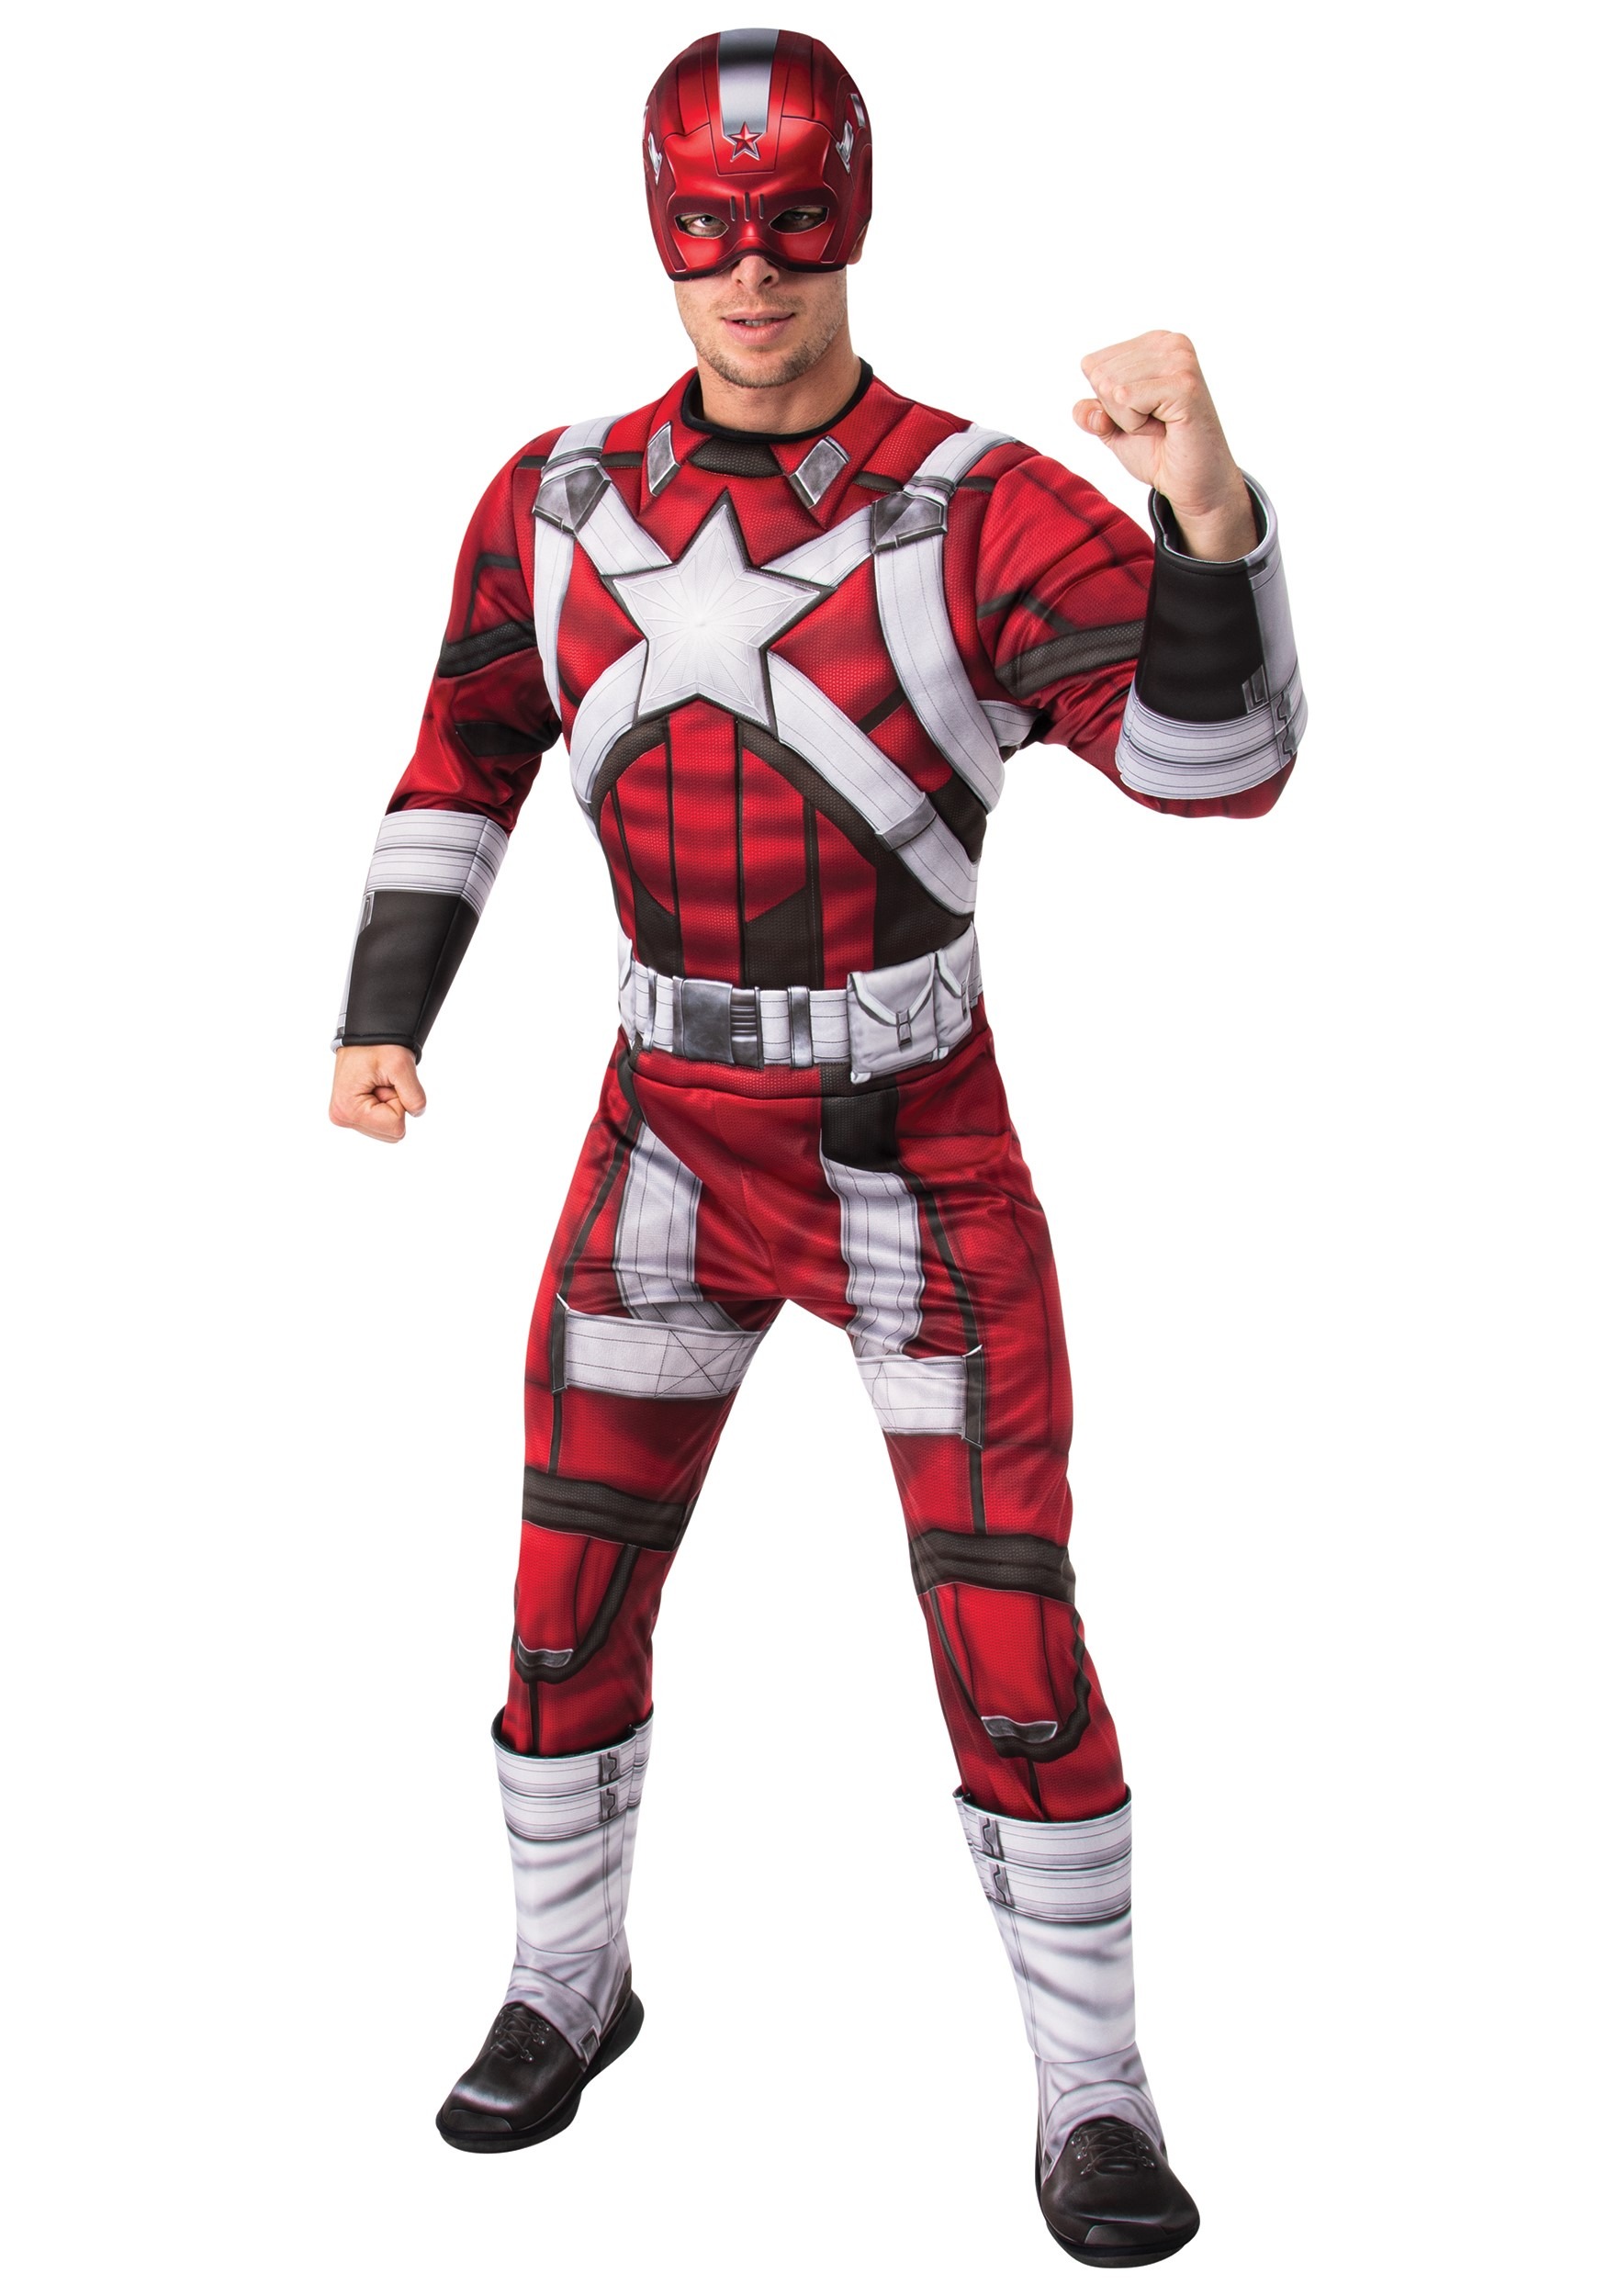 Image of Men's Red Guardian Deluxe Costume ID RU702068-ST